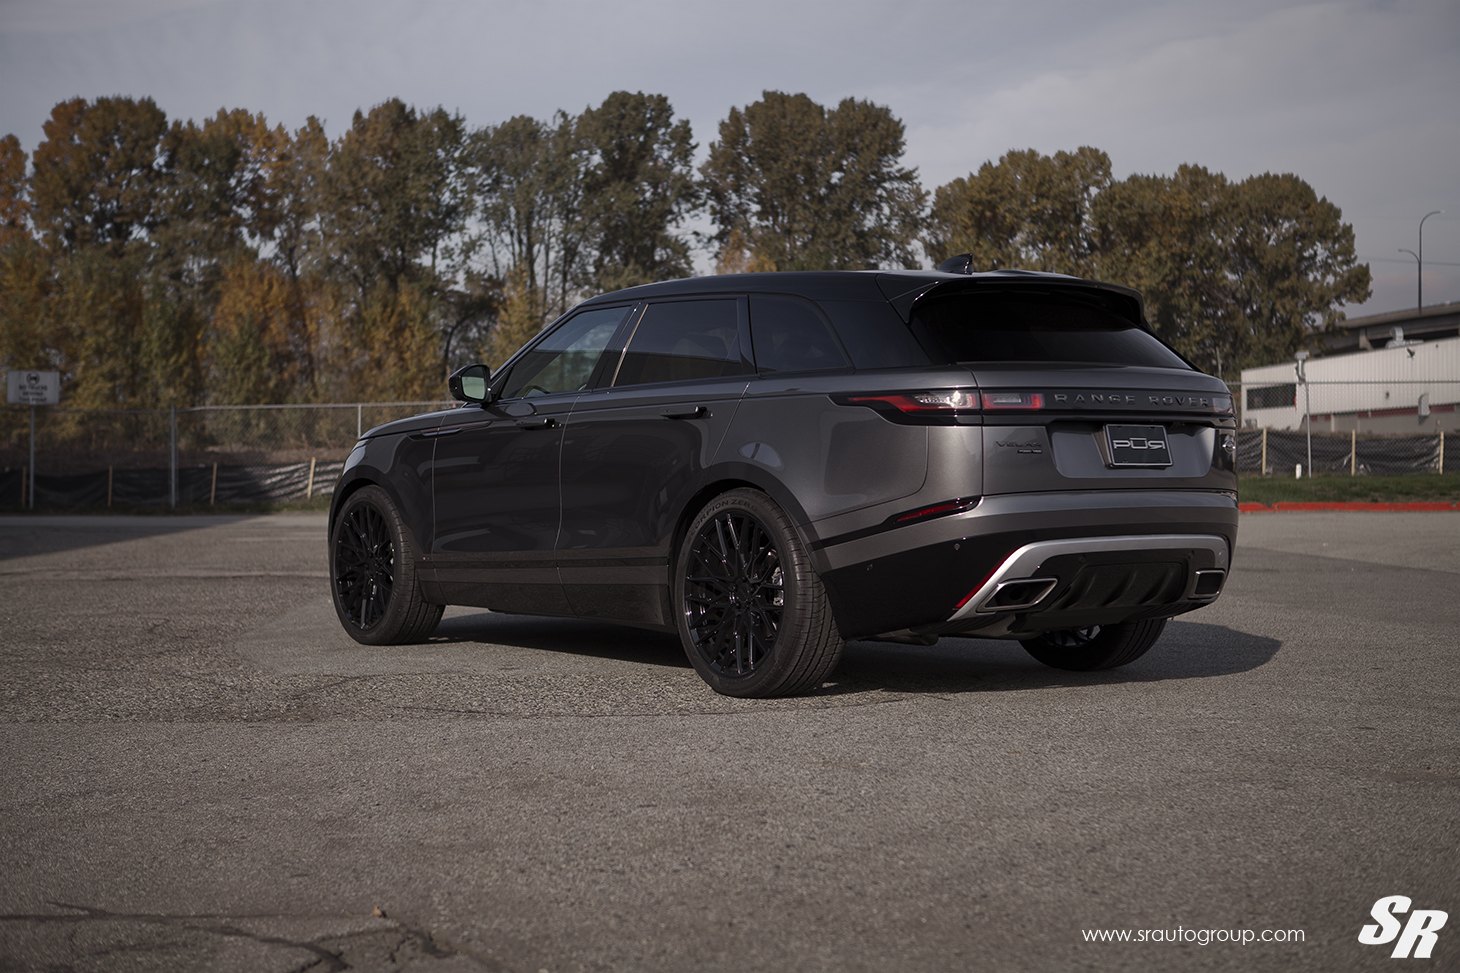 Black Range Rover Velar with Aftermarket Rear Diffuser - Photo by SR Auto Group